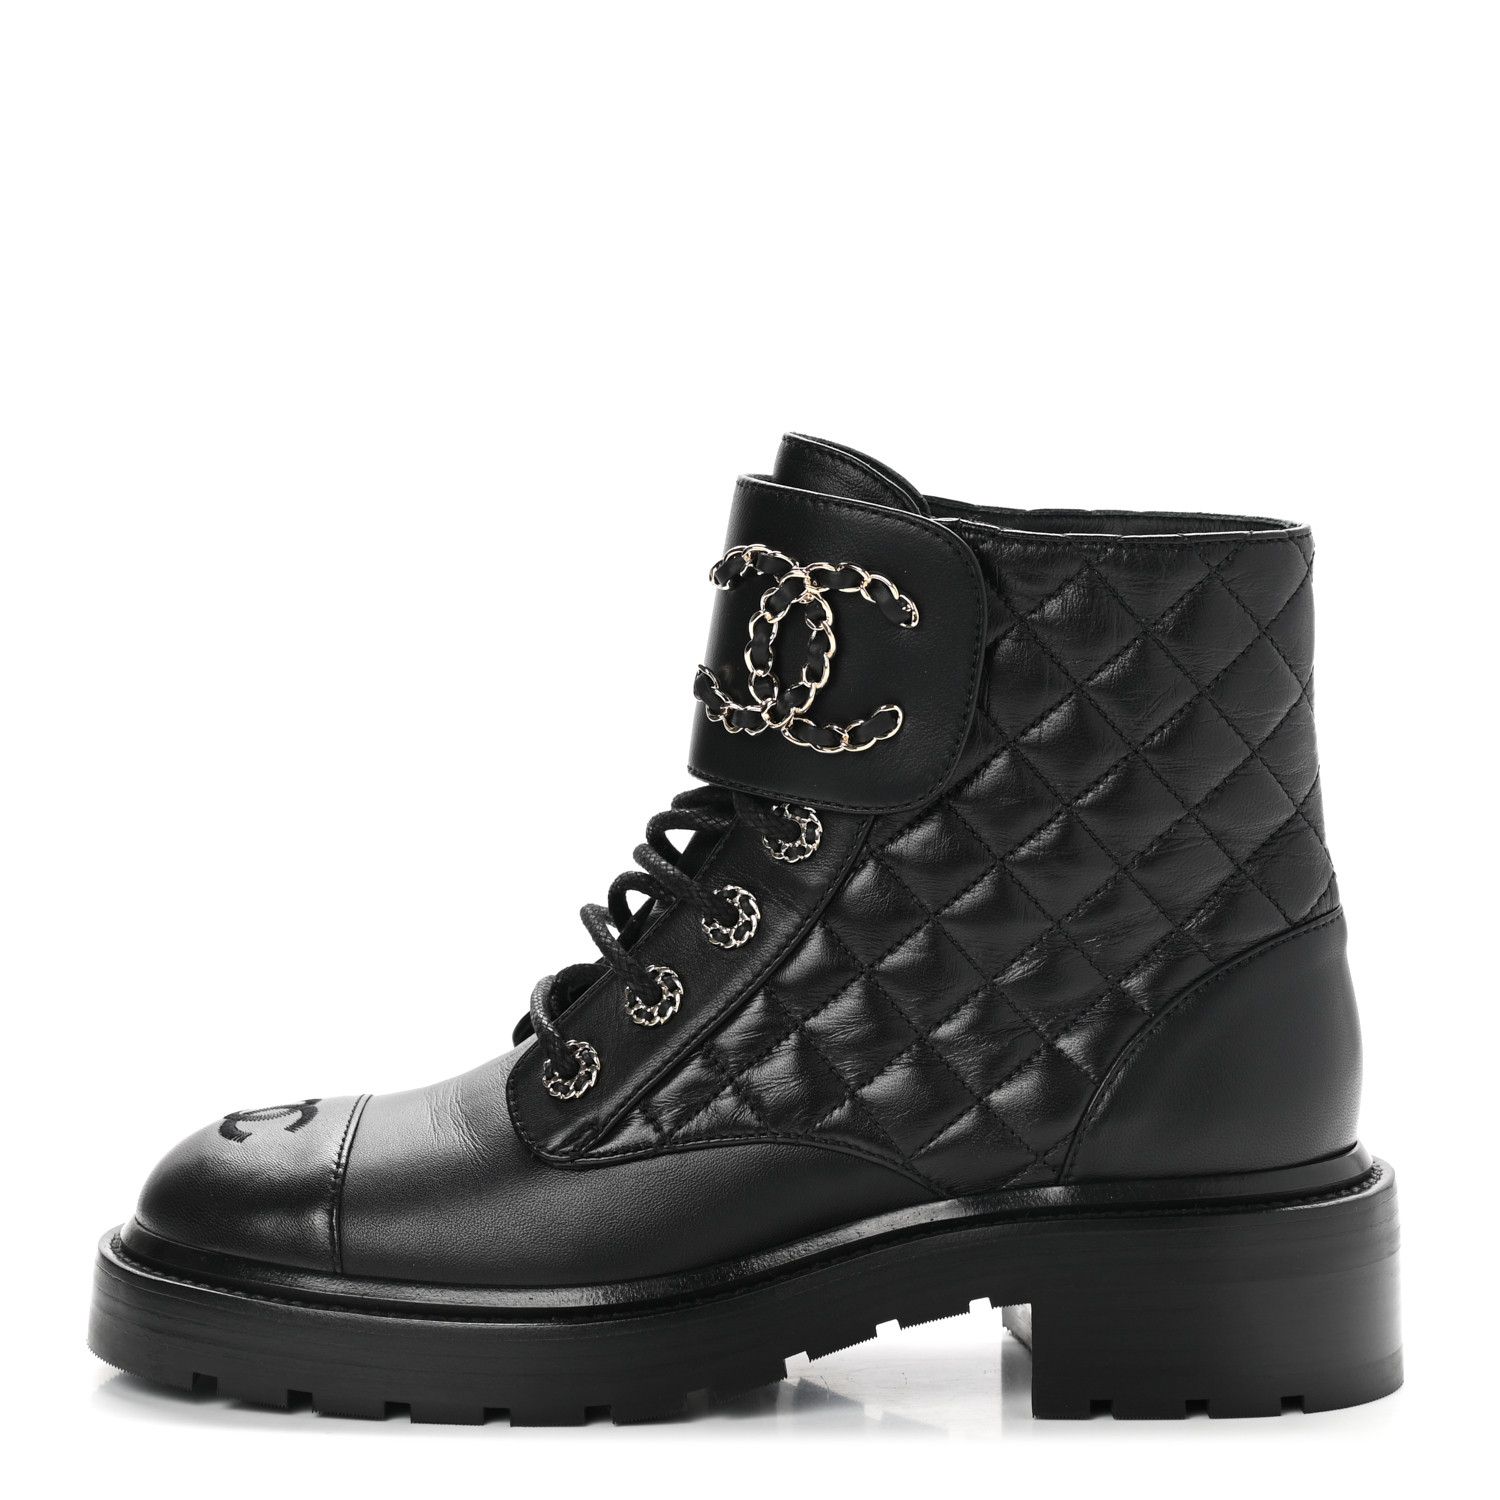 CHANEL Shiny Lambskin Quilted Lace Up Combat Boots 38 Black | FASHIONPHILE | Fashionphile